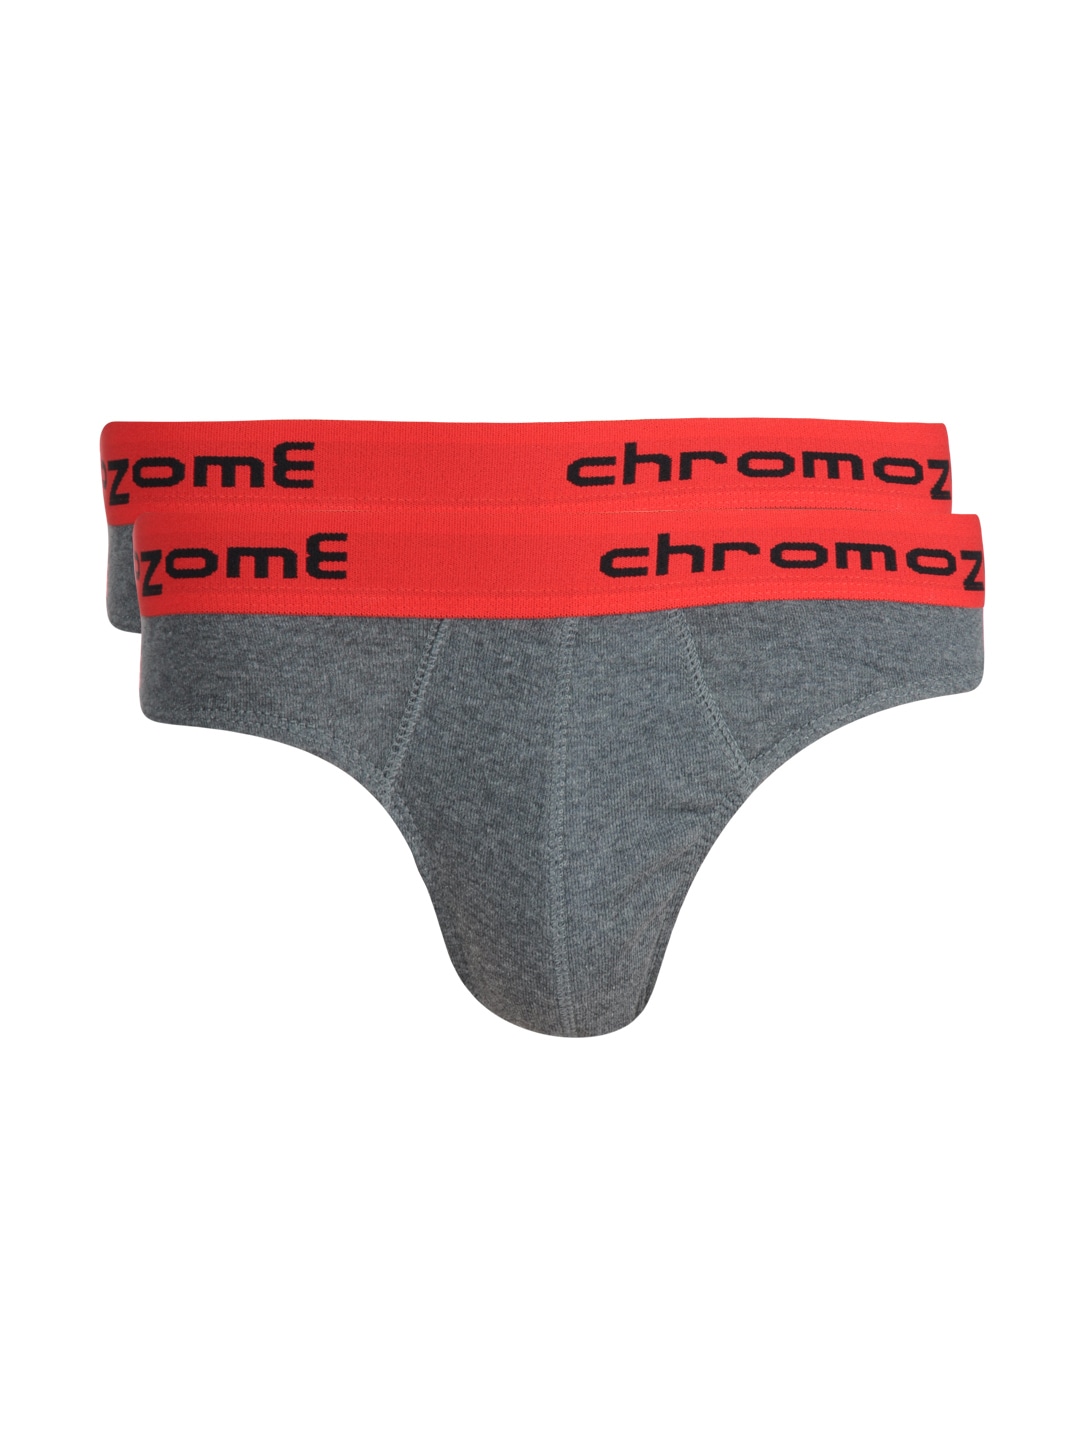 Chromozome Men Pack of Two  Briefs